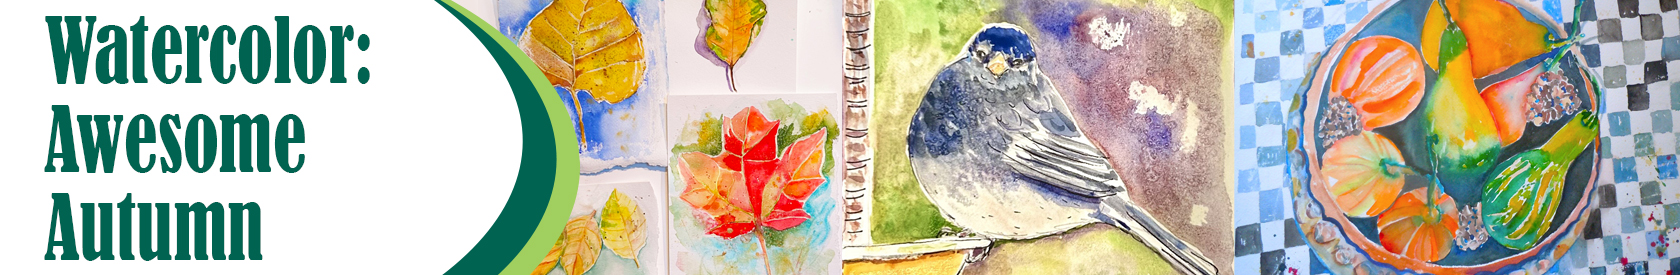 Watercolor Classes: Awesome Autumn 